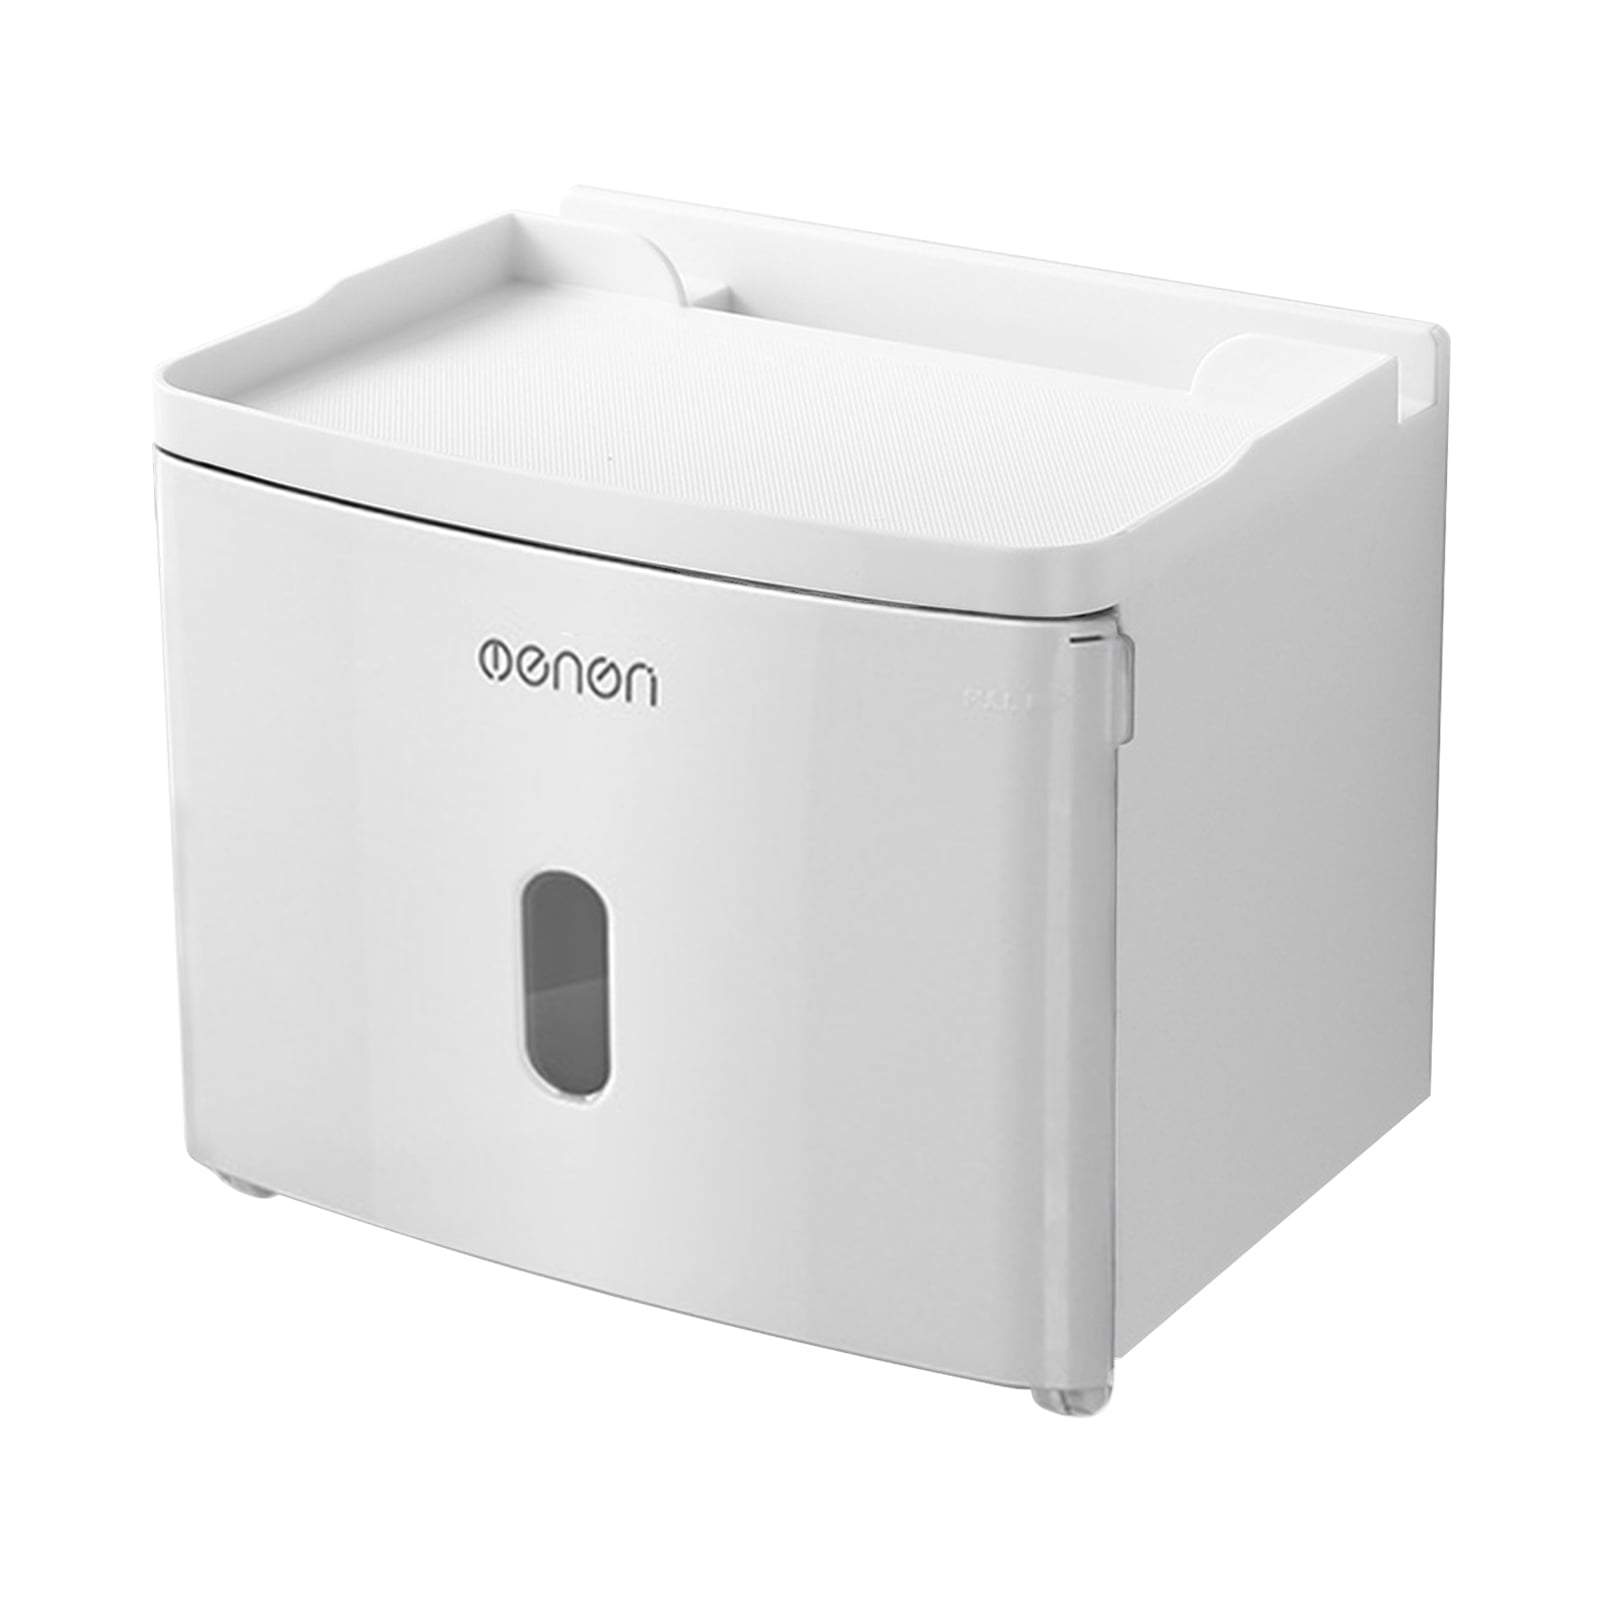 Innovia Automatic Paper Towel Dispenser. Touchless Technology. Works with  Mos